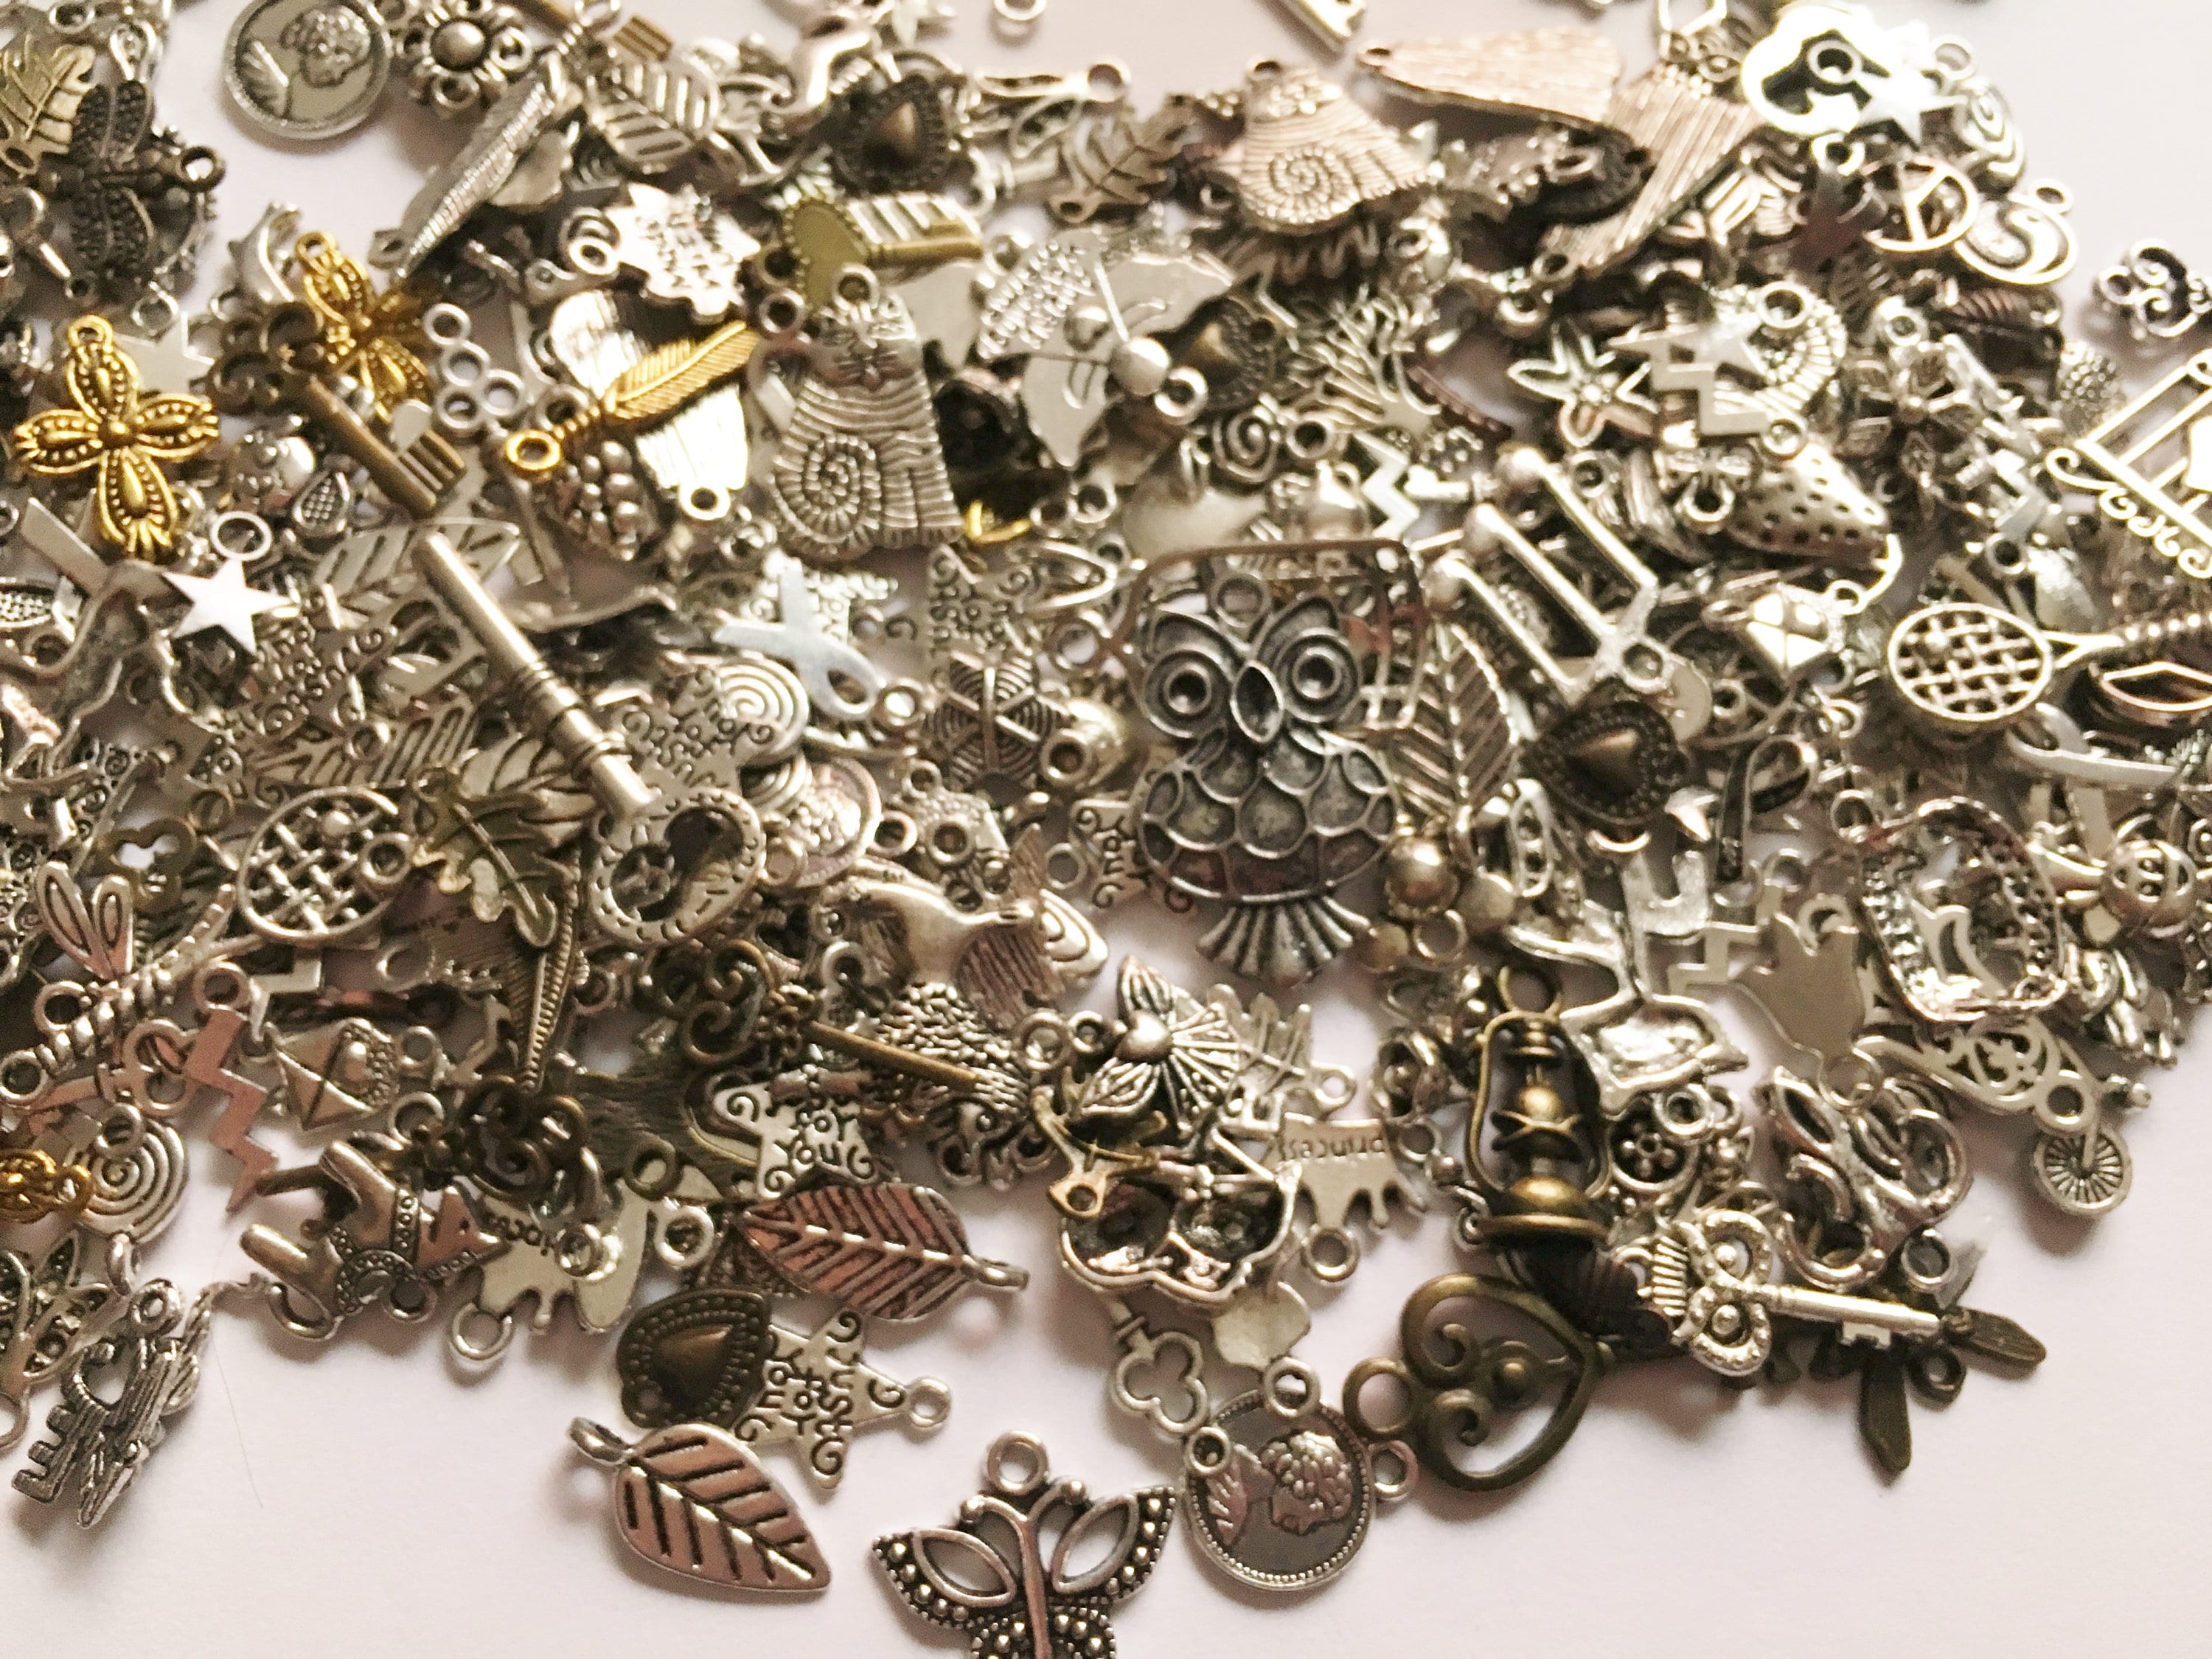 Liquidation Bulk Charms Lot, Pendant Charm Mix, Assorted Charms or Request  Some Themes 